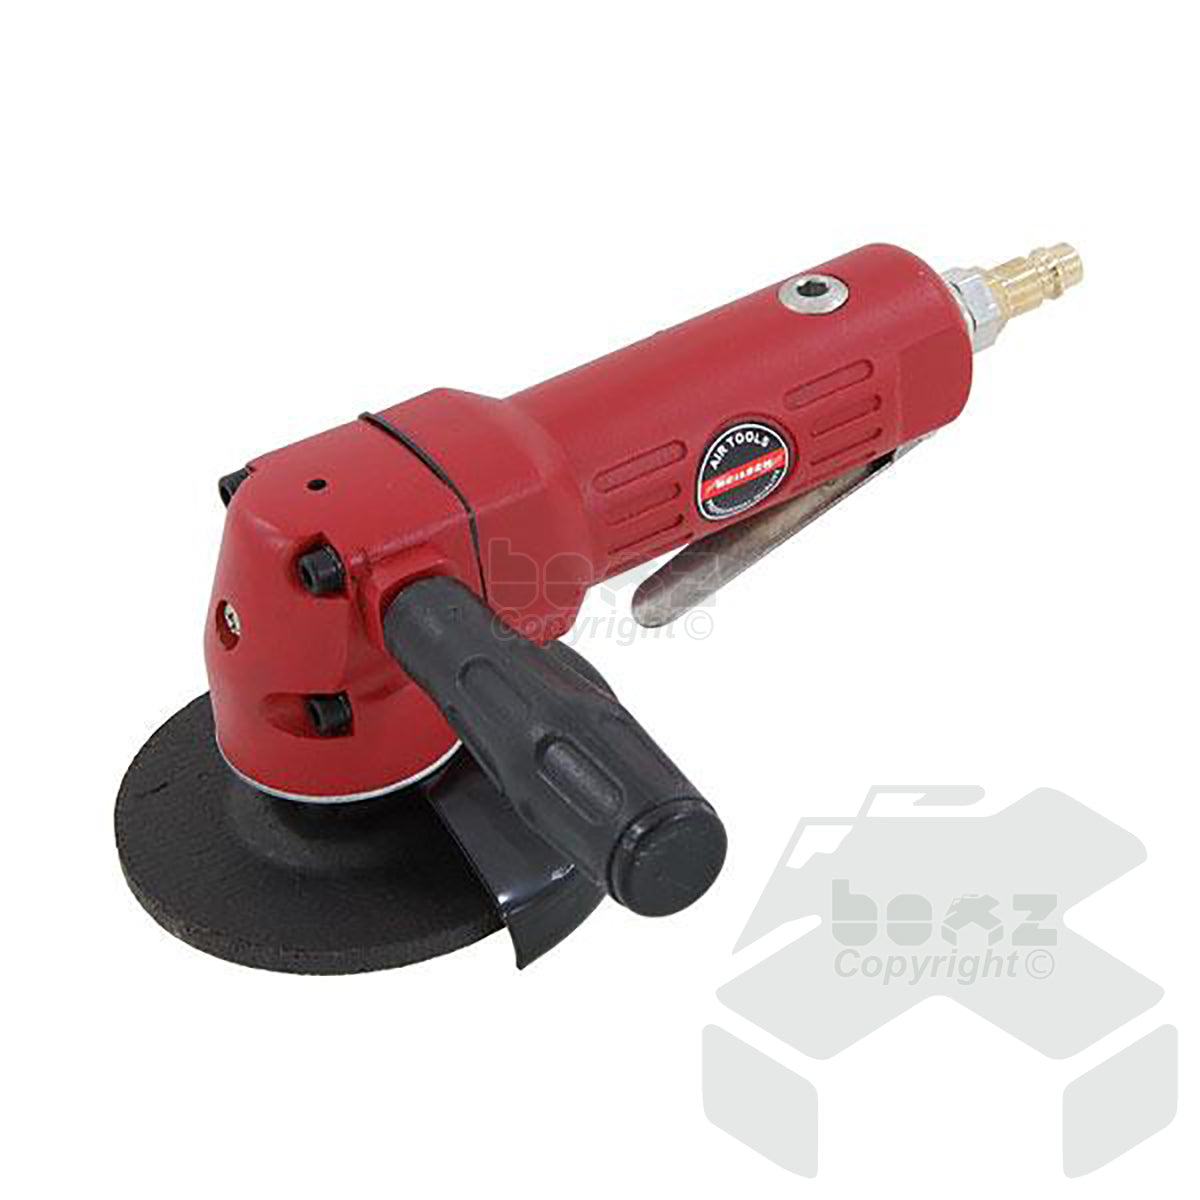 Neilsen Air Angle Grinder 4 Inch